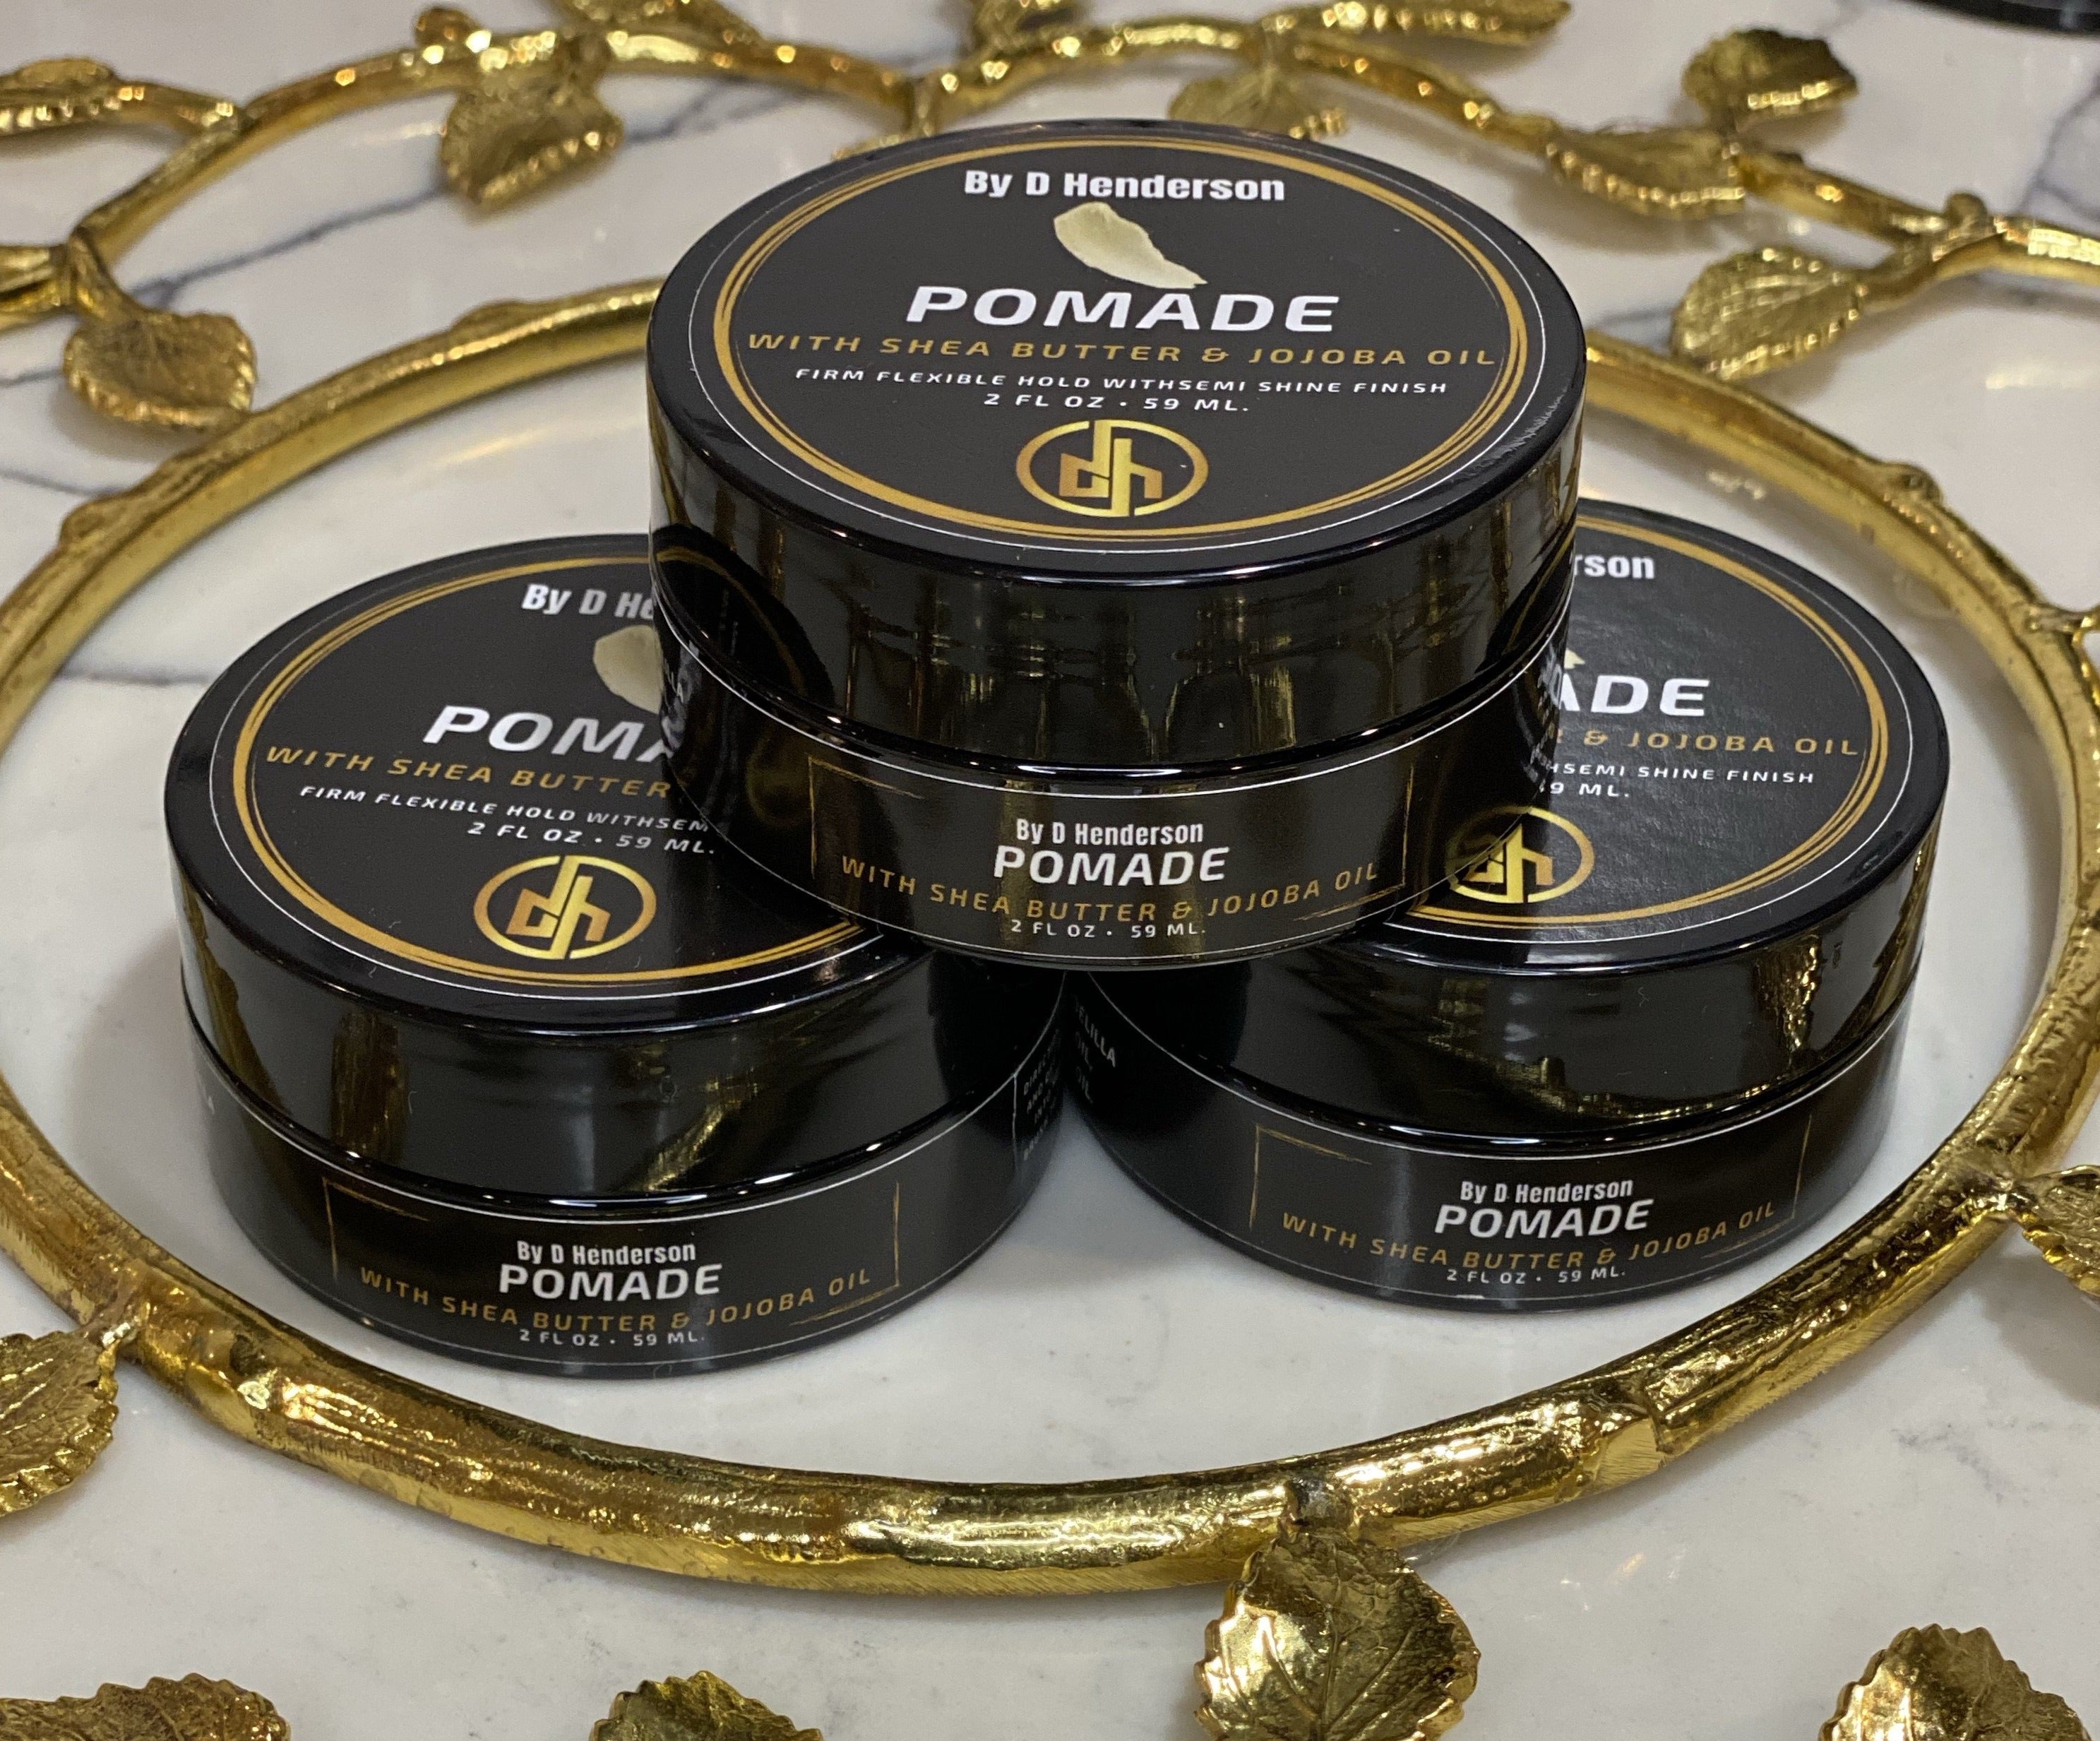 THE POMADE